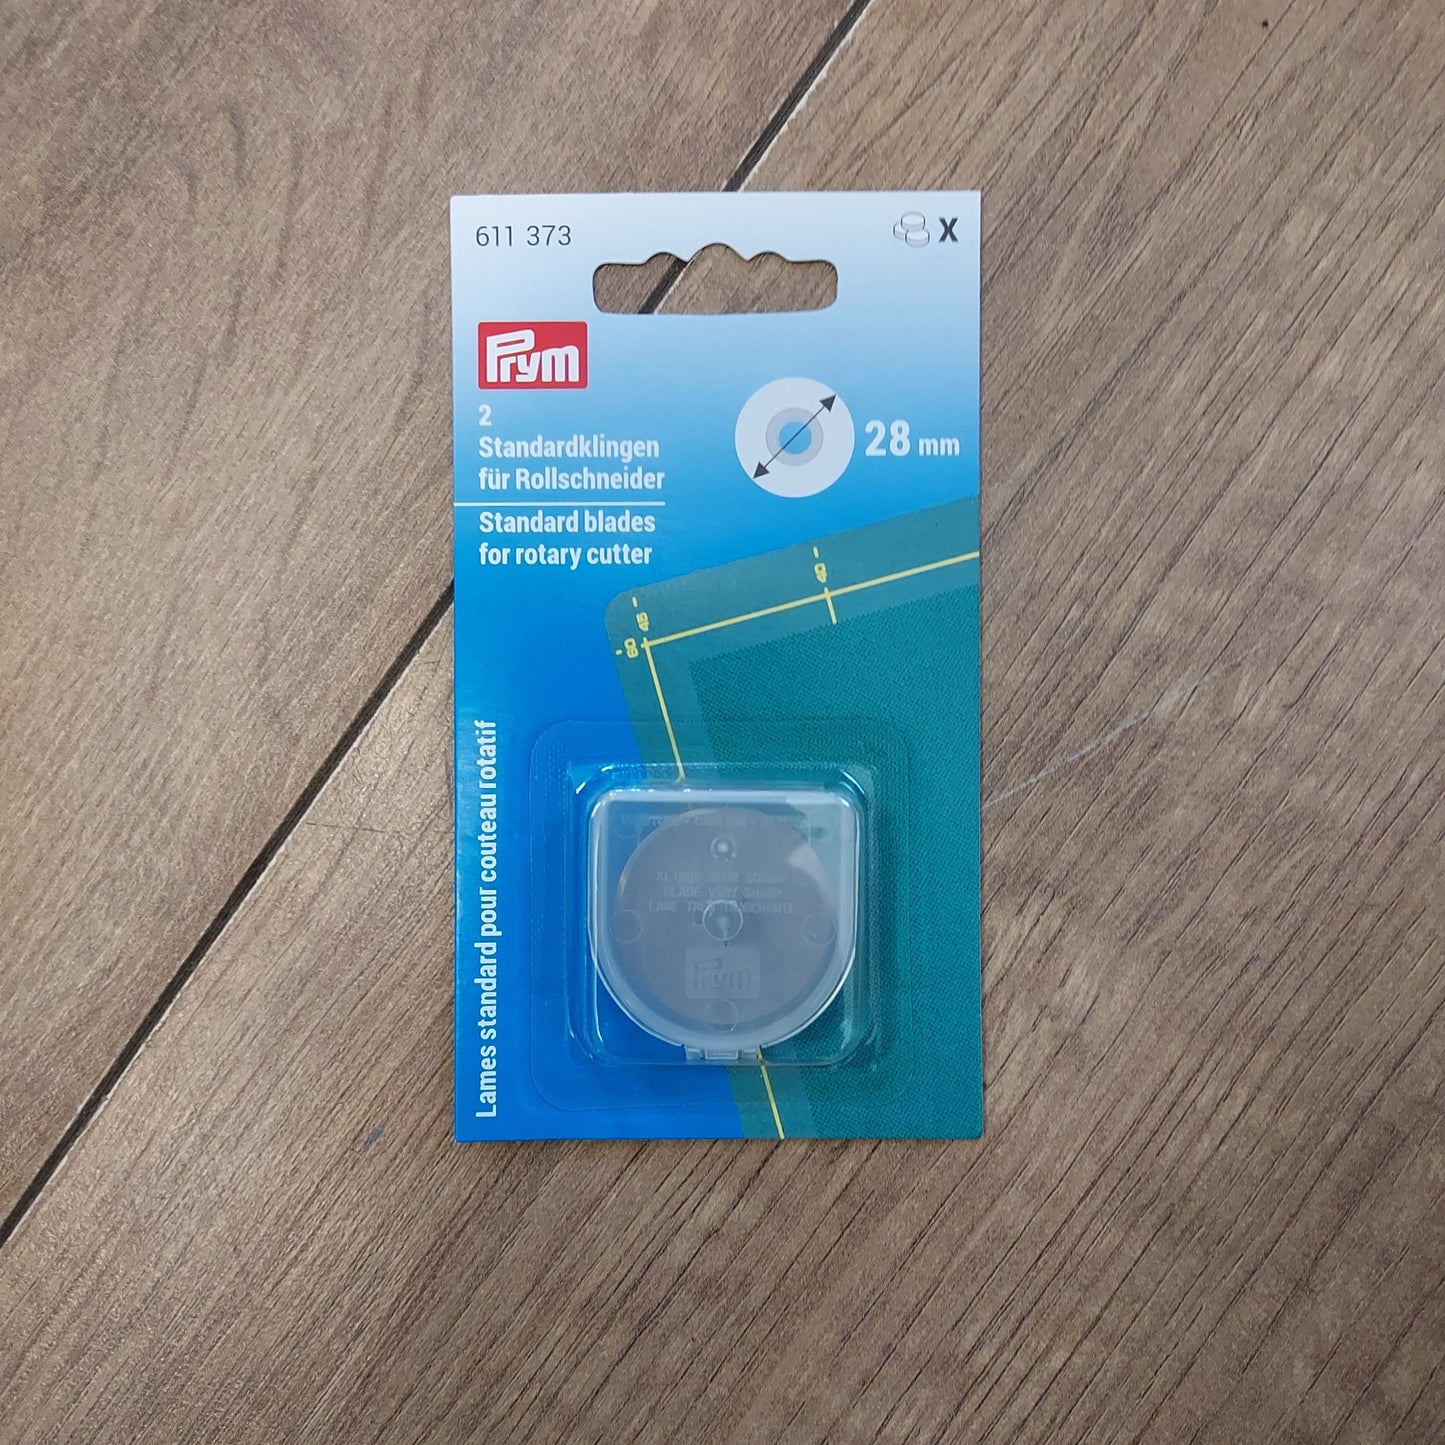 Prym Standard Blades for Rotary Cutter - Various